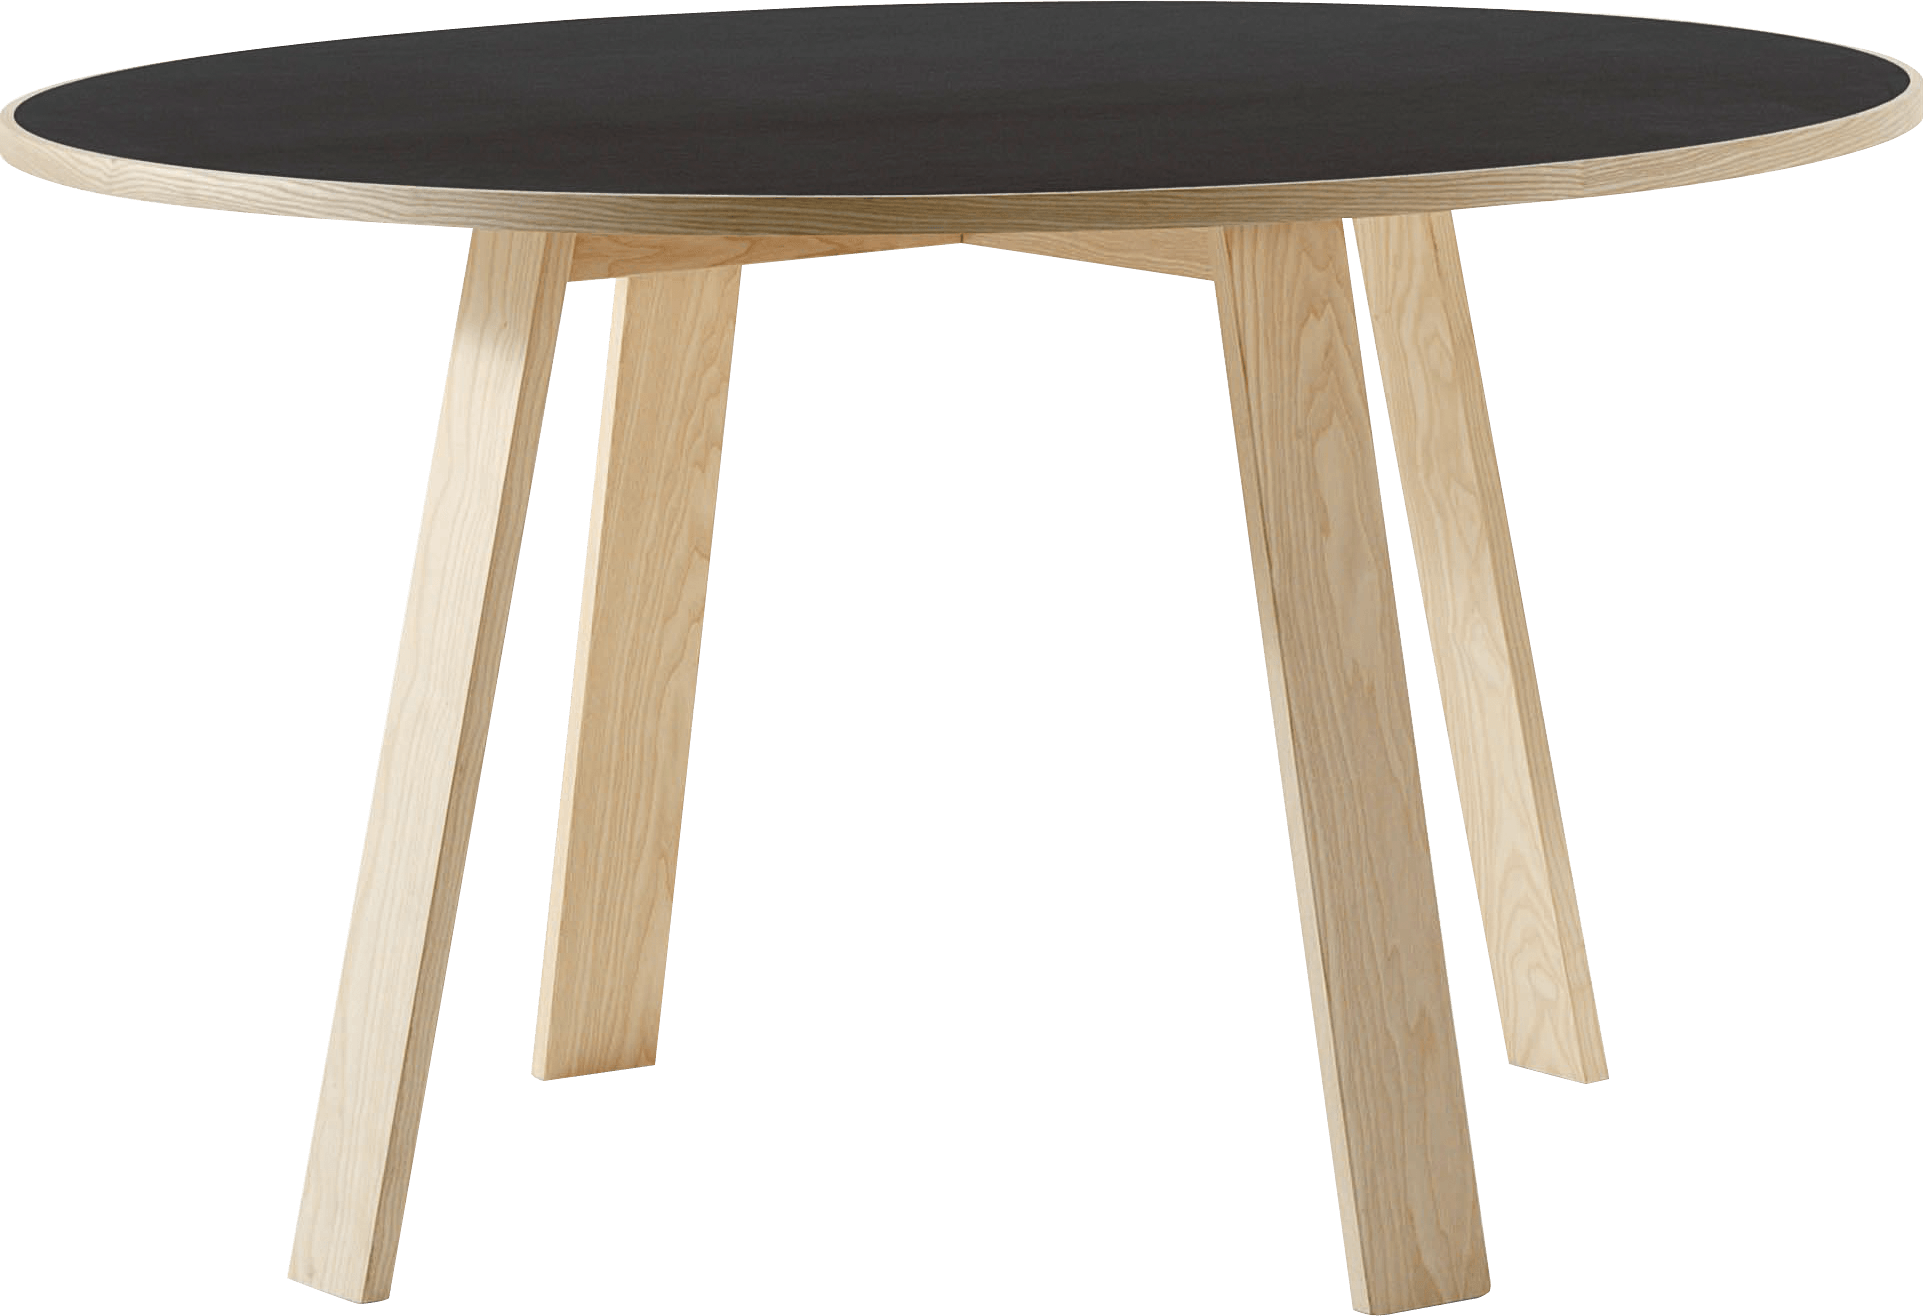 Table Png Image PNG Image